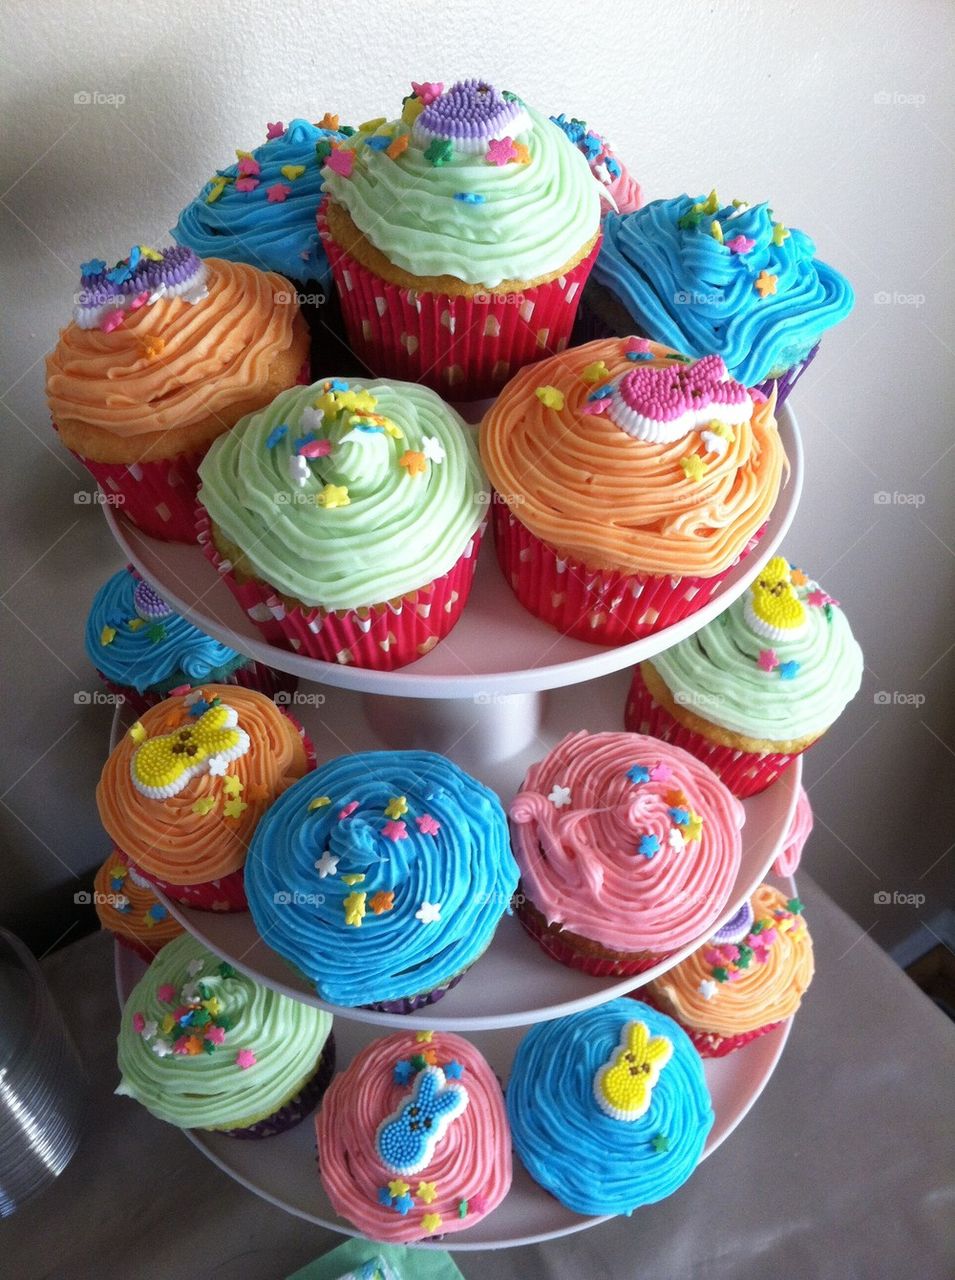 Cupcakes Easter sweets